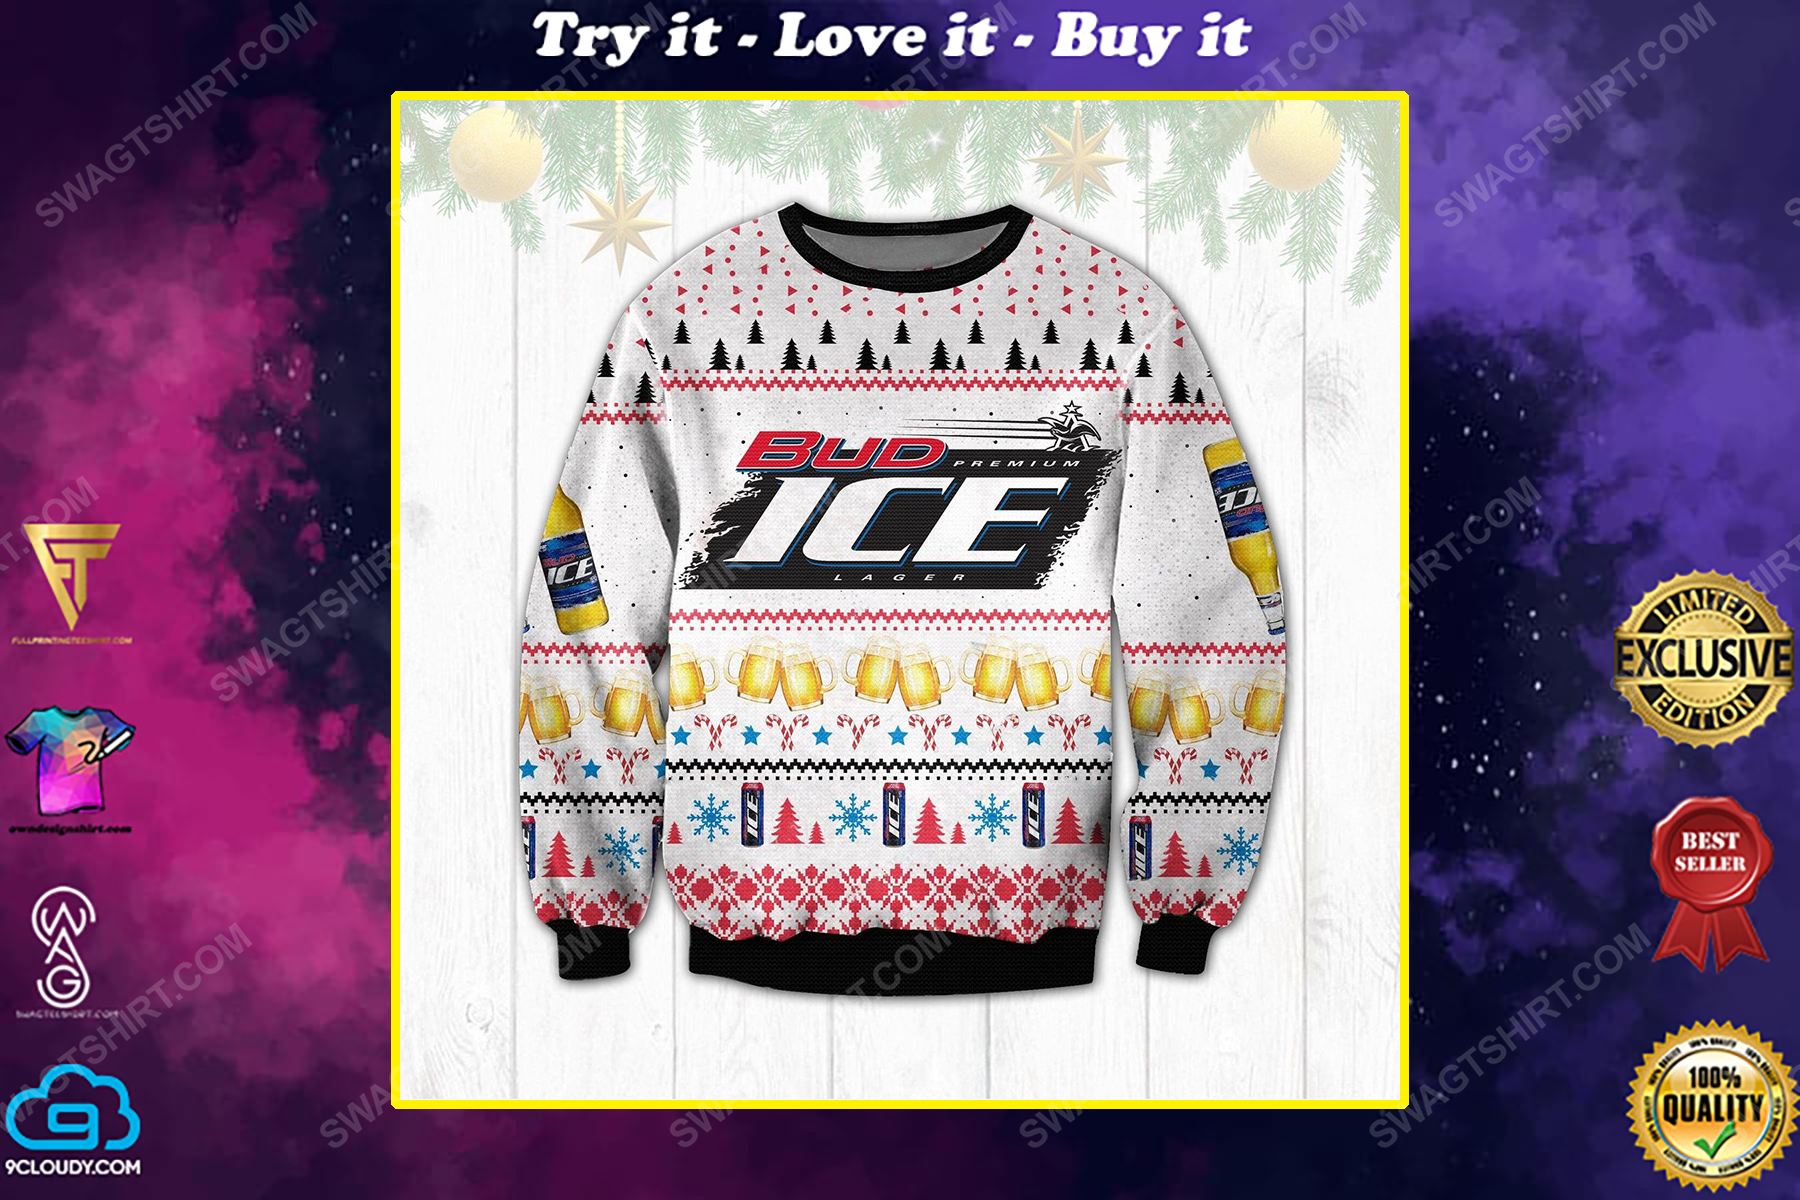 Bud ice lager beer ugly christmas sweater